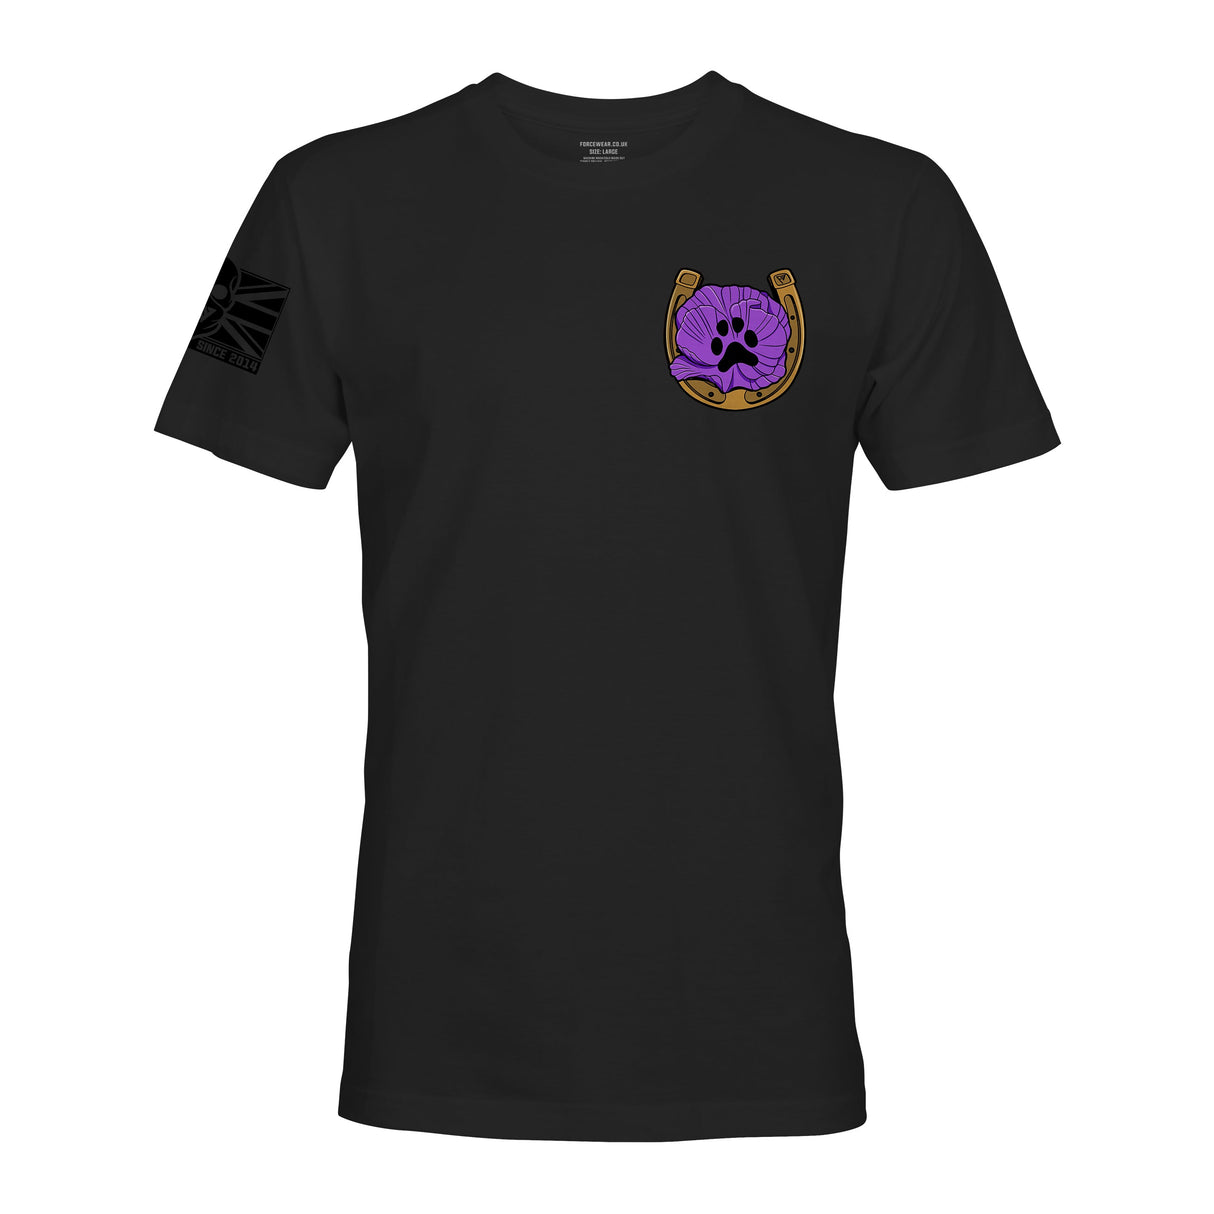 ANIMALS MEMORIAL - Force Wear HQ - T-SHIRTS